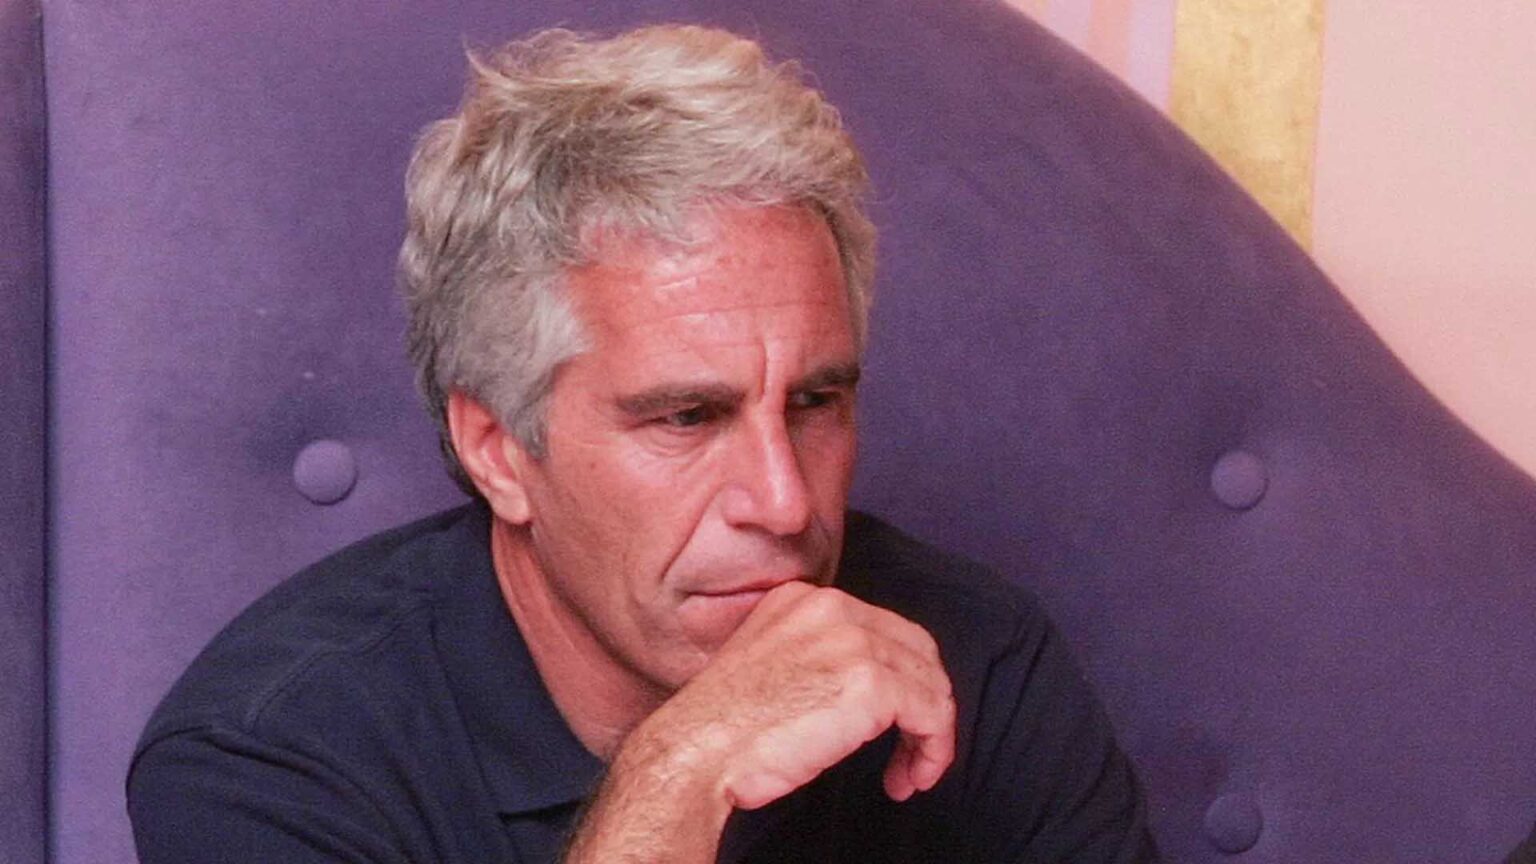 Many wonder what Epstein spent his net worth on. We’ve gone ahead and found some of the weirdest most uncomfortable images from Jeffrey Epstein’s homes.